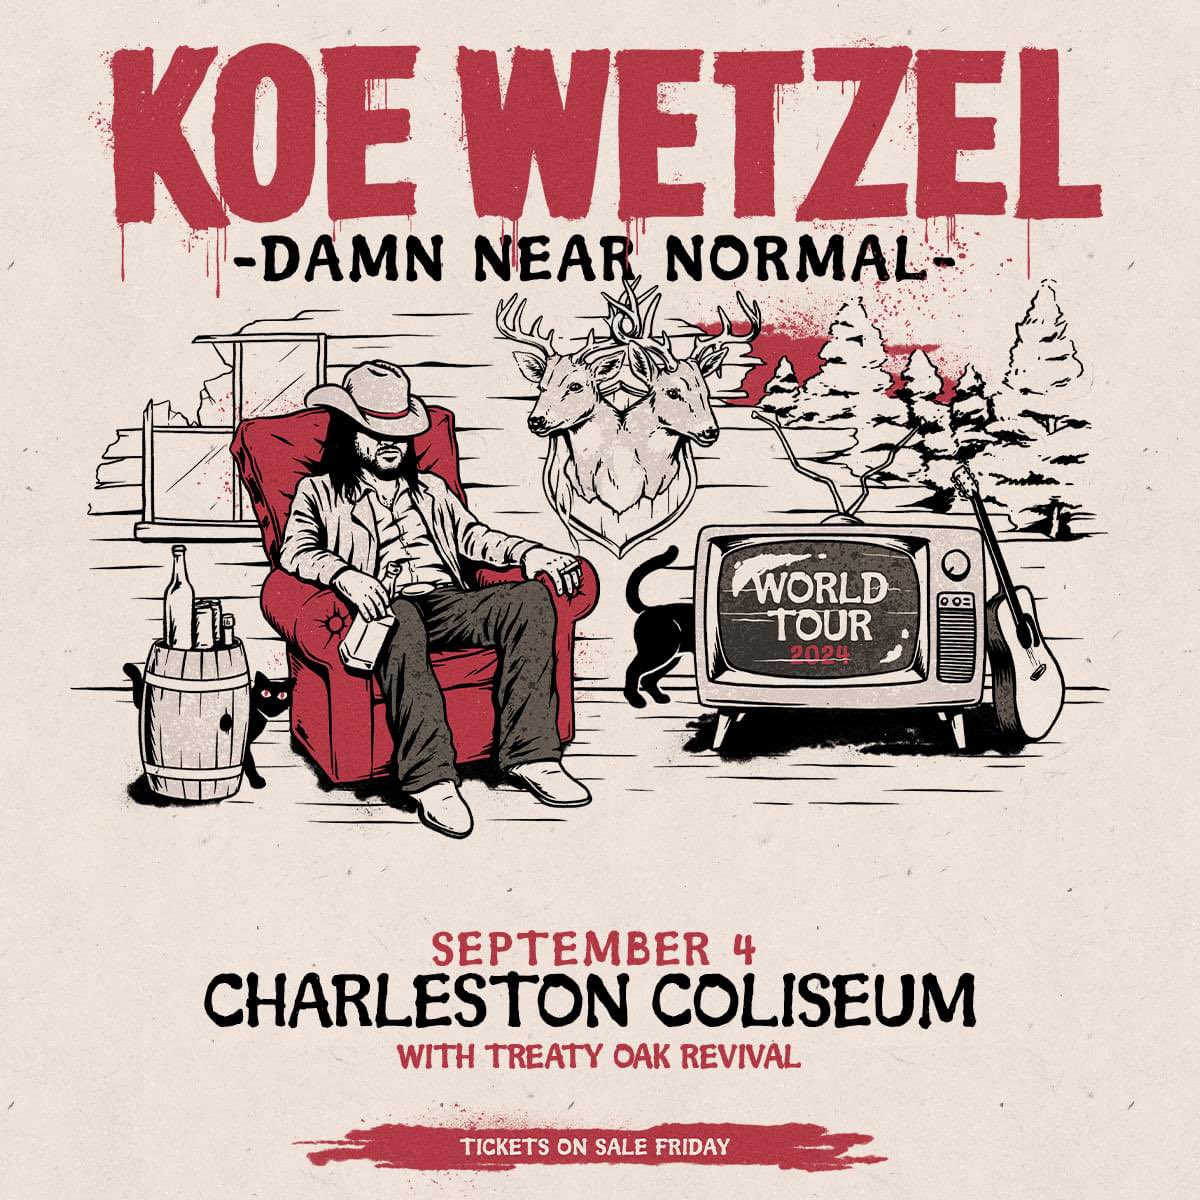 Koe Wetzel is taking the Damn Near Normal Tour to the Charleston Coliseum on September 4th. Tickets on sale this Friday! Don’t miss a wild night to remember 🔥🎸 bit.ly/3IUuf7o